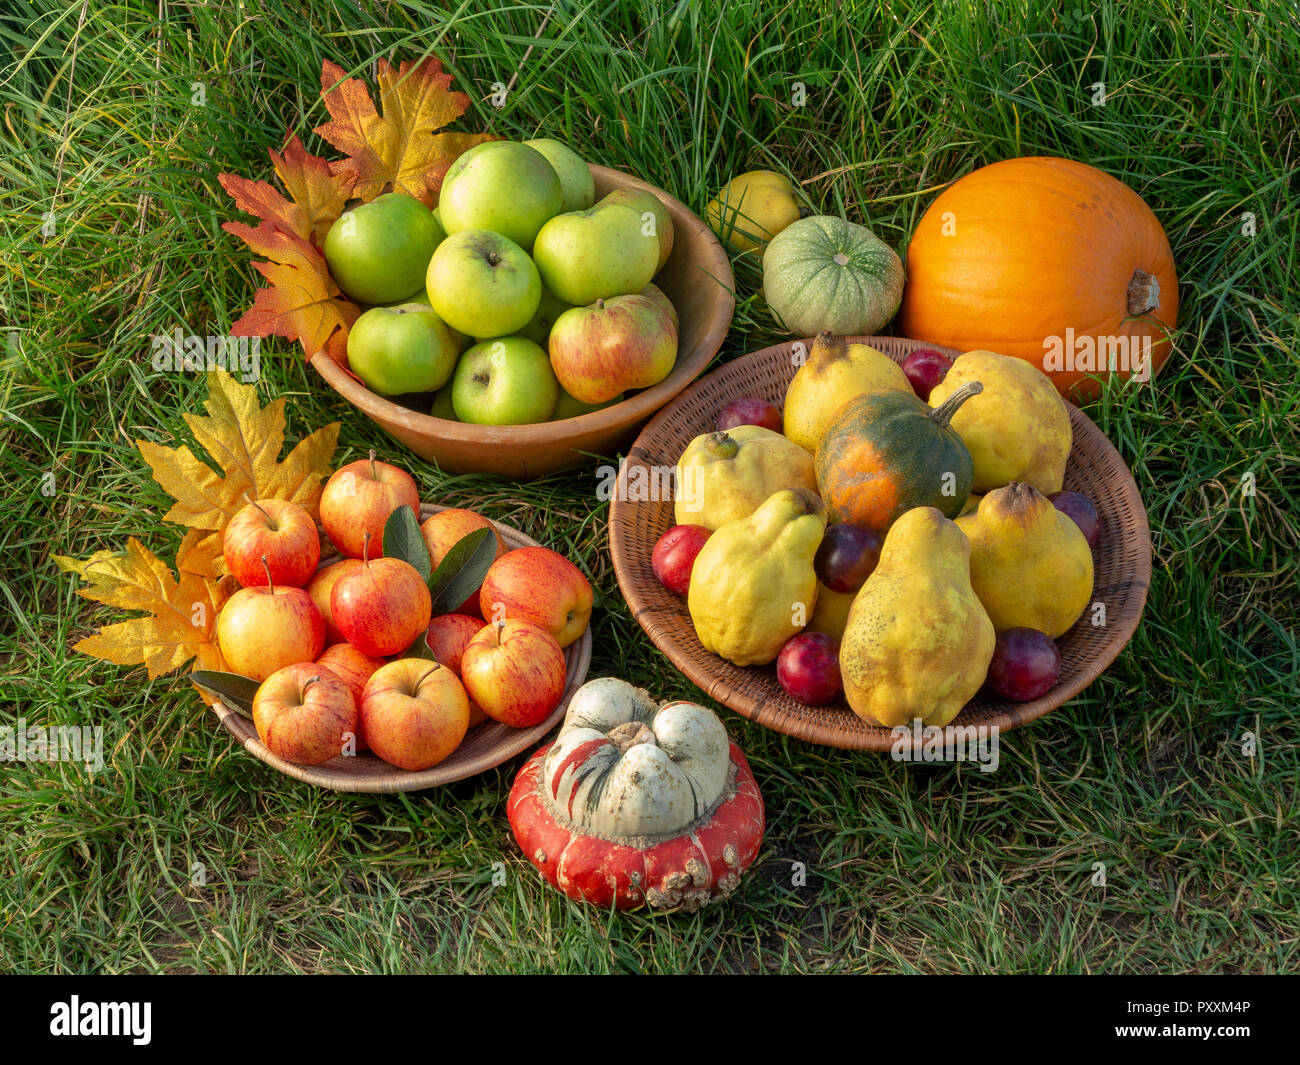 A selection of autumn fruits in bowls on a green grass background with leaf decorations Stock Photo